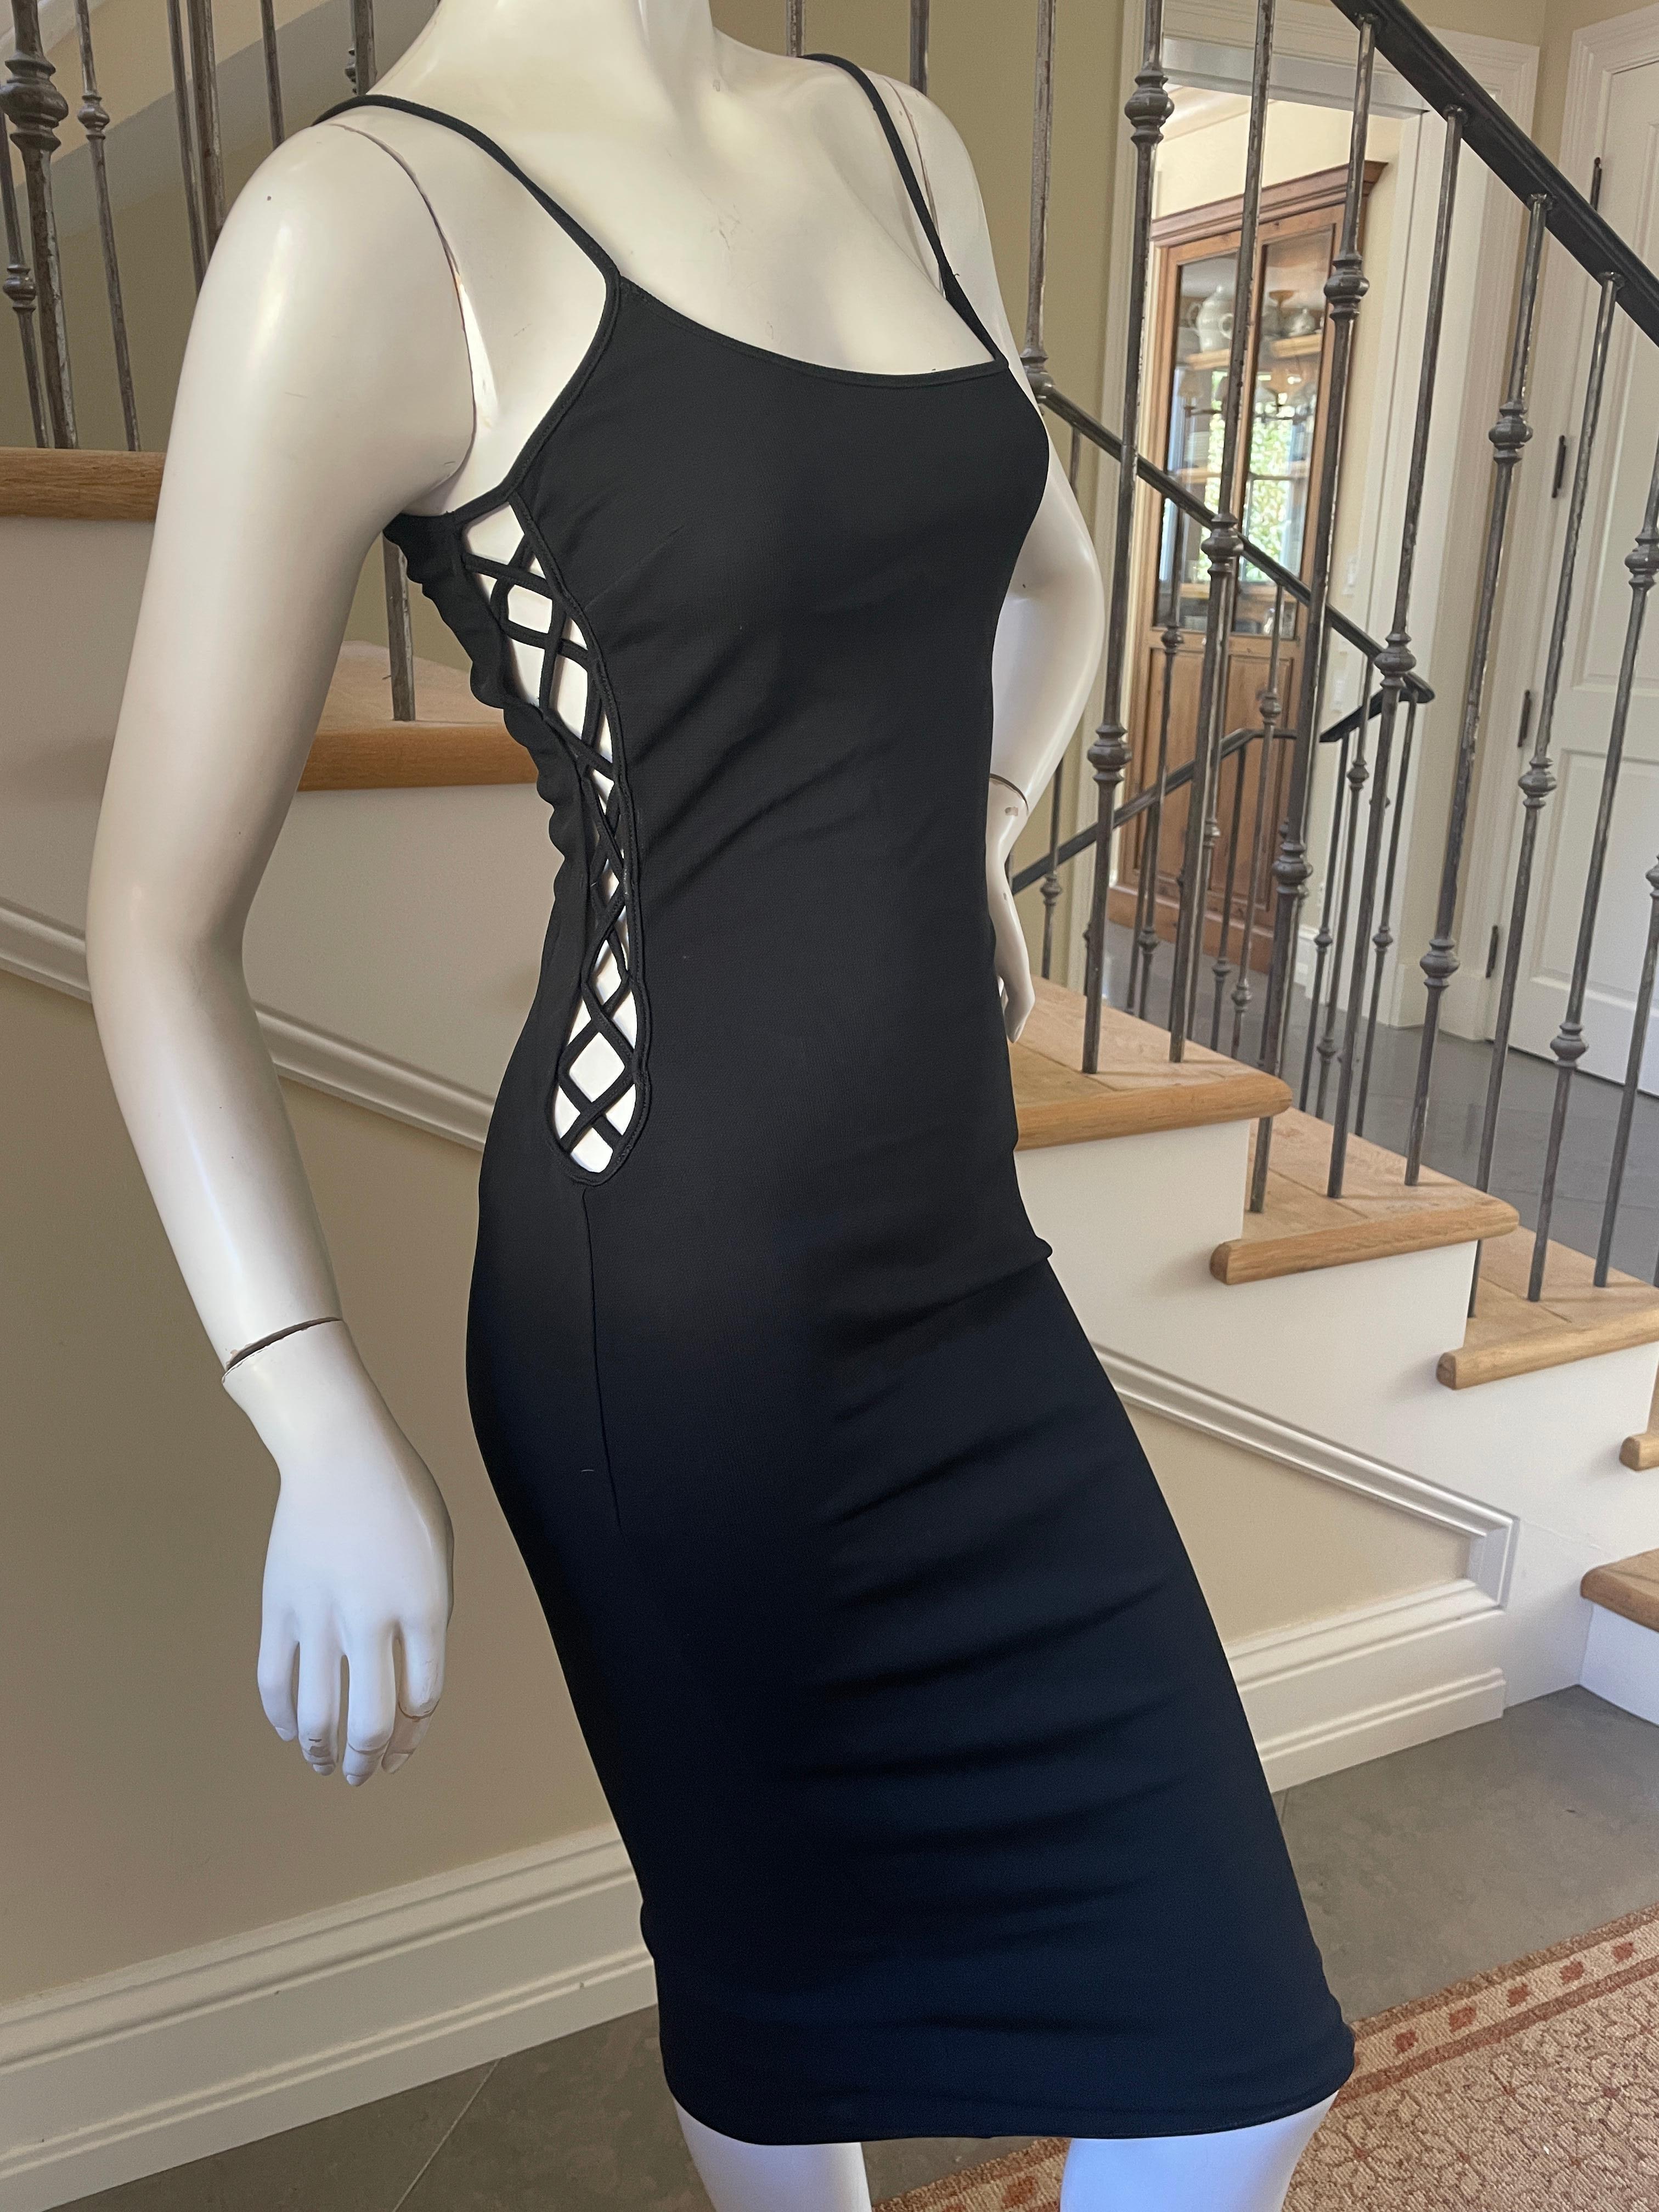 Dolce & Gabbana for D&G Vintage Black Cocktail Dress with Cut Out Laced Sides In Good Condition For Sale In Cloverdale, CA